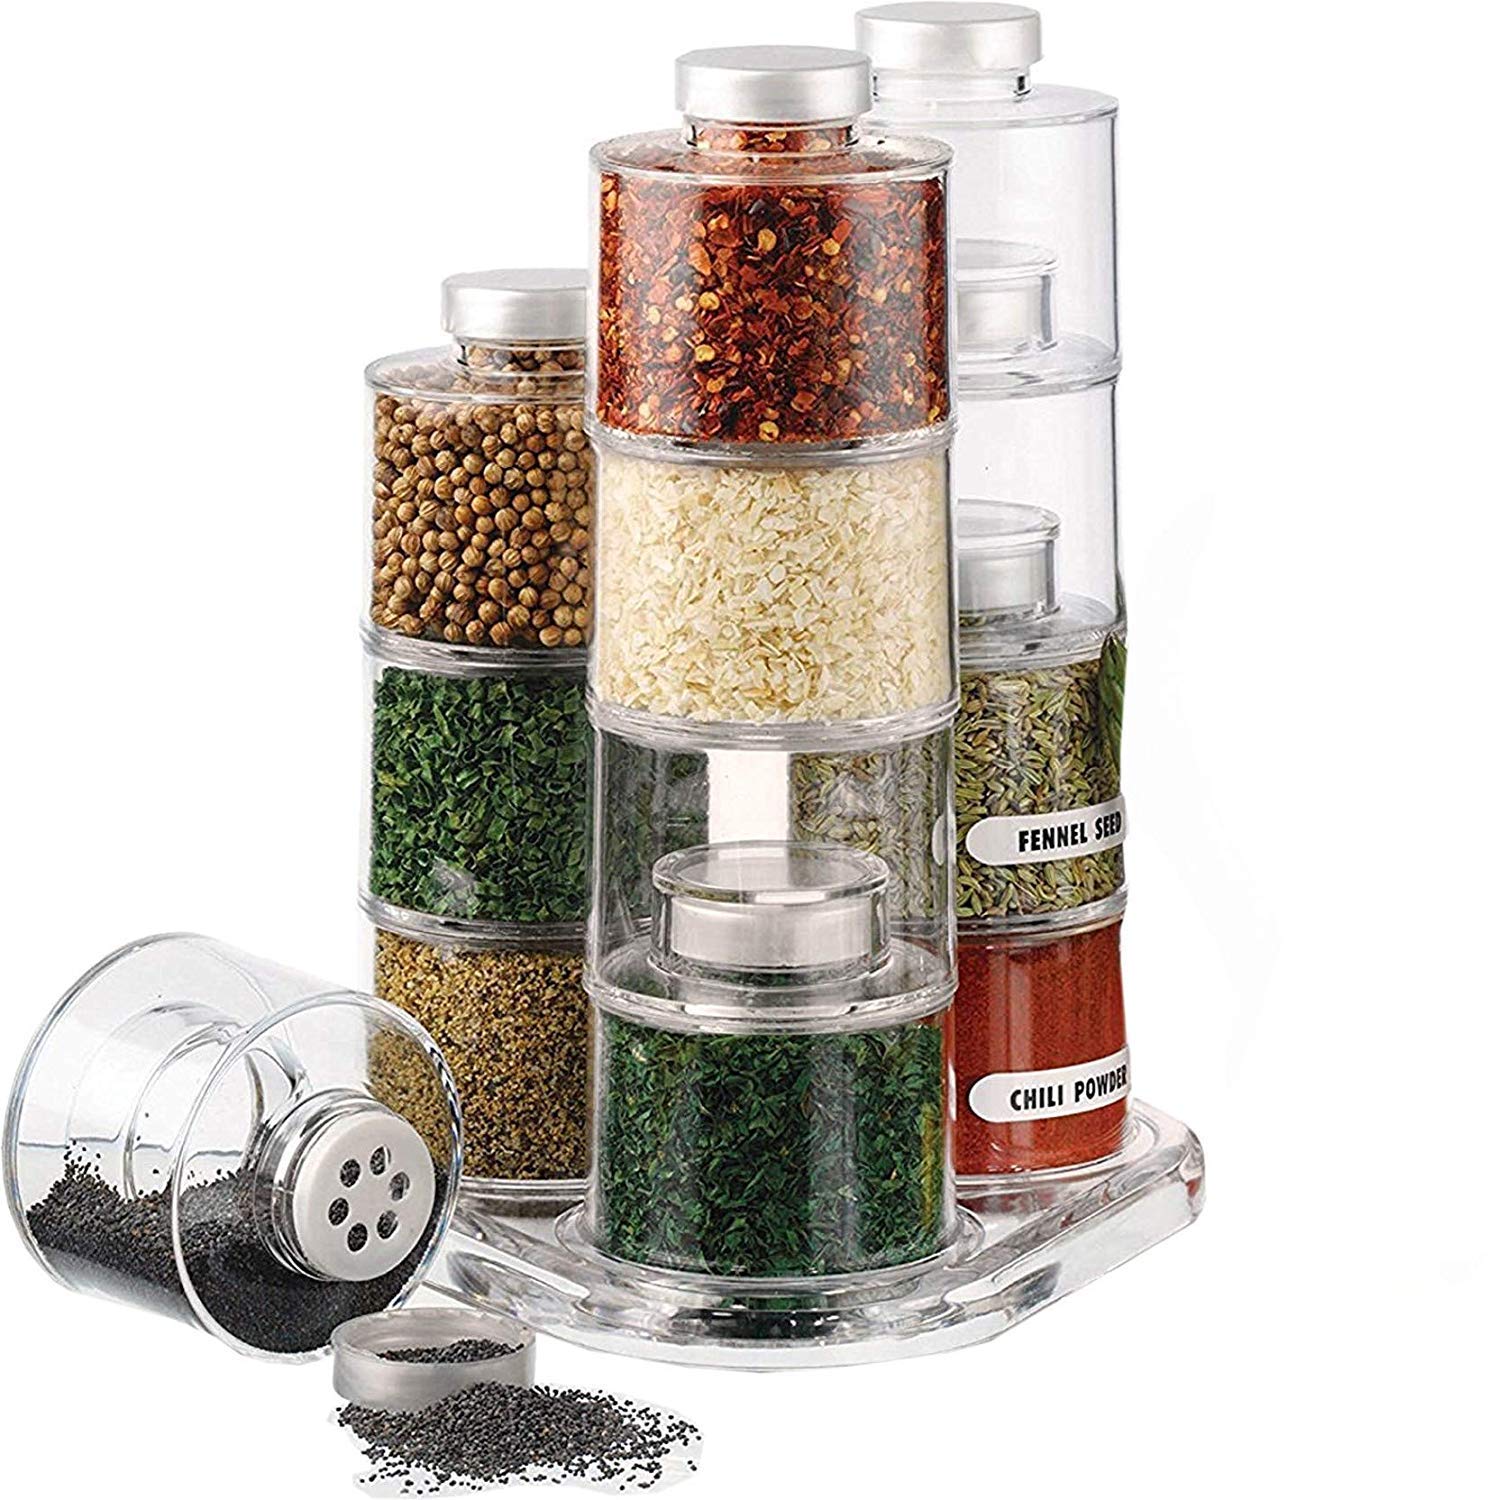 12 pcs Spice Tower Crusher Price in Pakistan